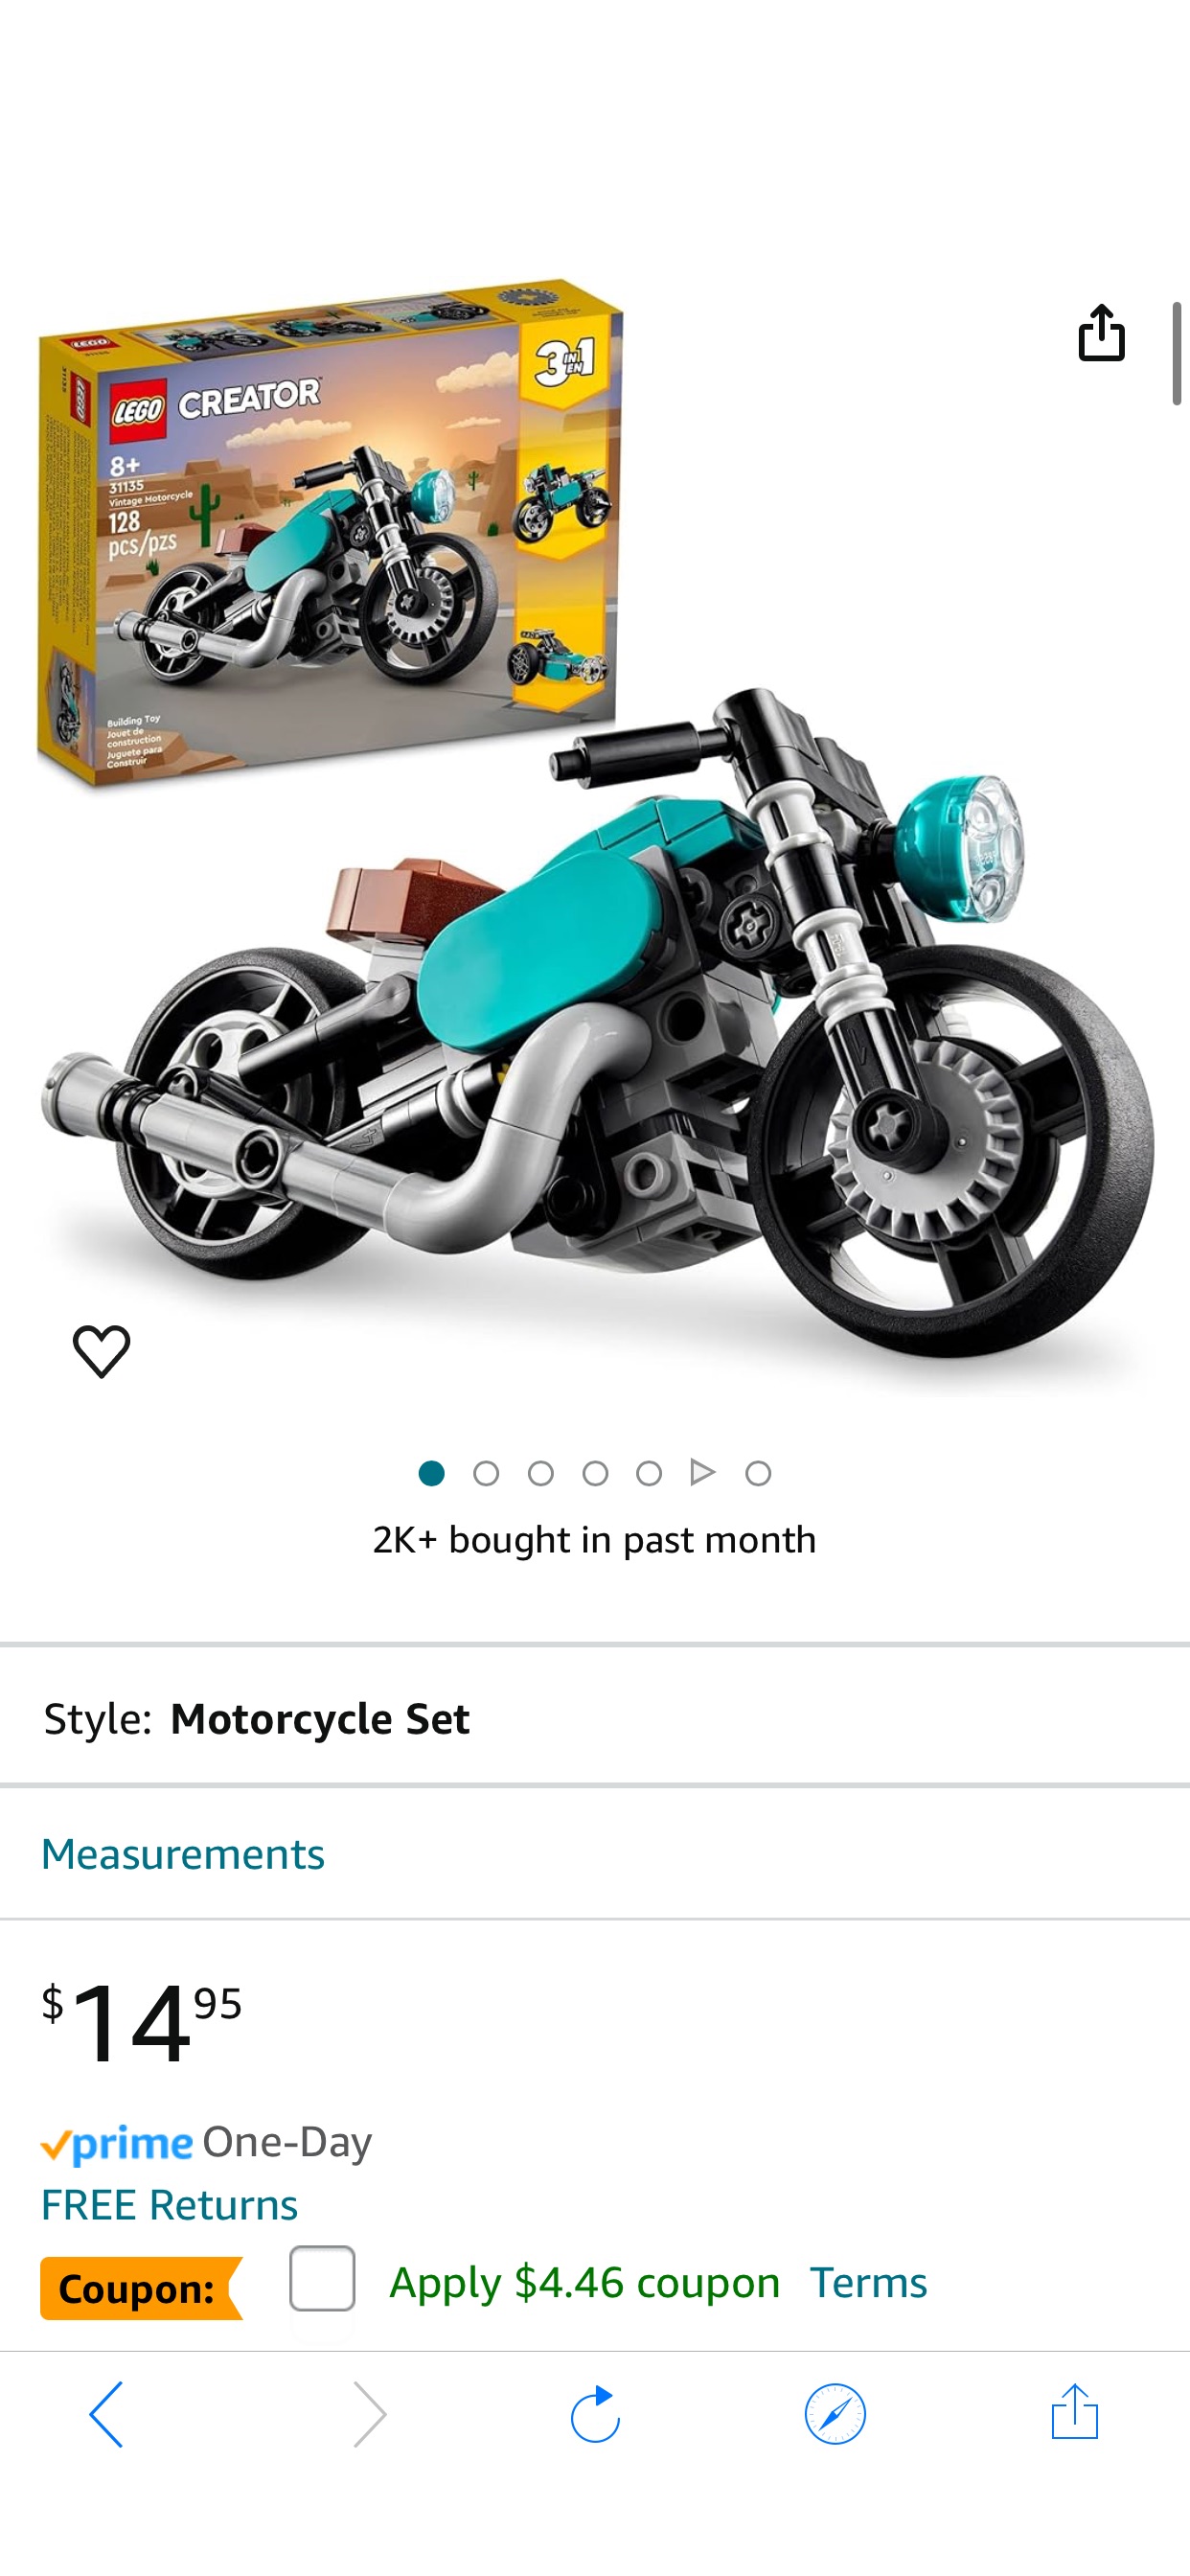 Amazon.com: LEGO Creator 3 in 1 Vintage Motorcycle Set, Transforms from Classic Motorcycle Toy to Street Bike to Dragster Car, Vehicle Building Toys, Great Gift for Boys, Girls, and Kids 8 Years Old a